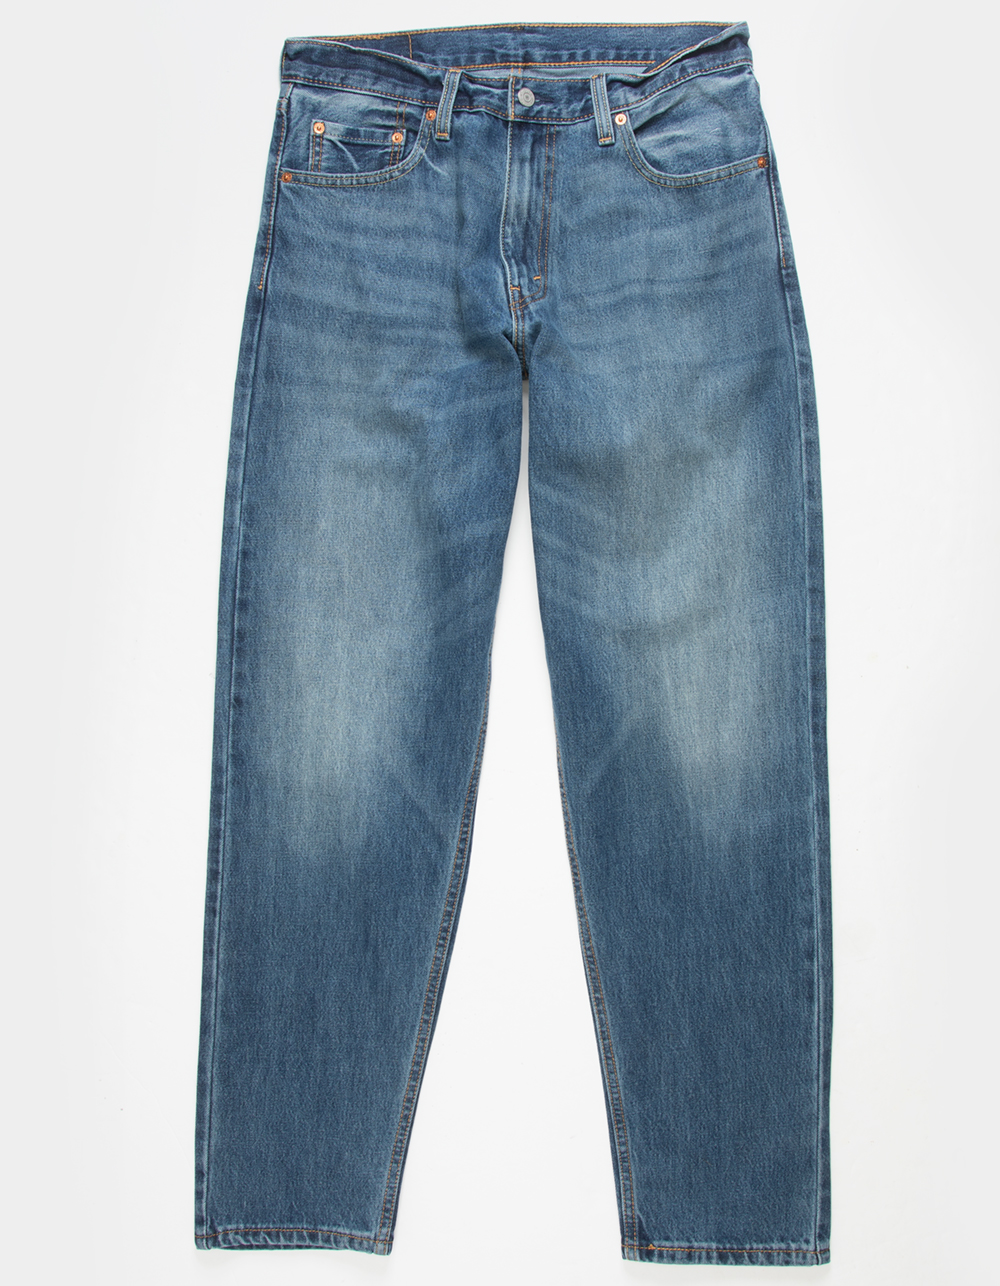 LEVI'S 550 92 Relaxed Taper Mens Jeans